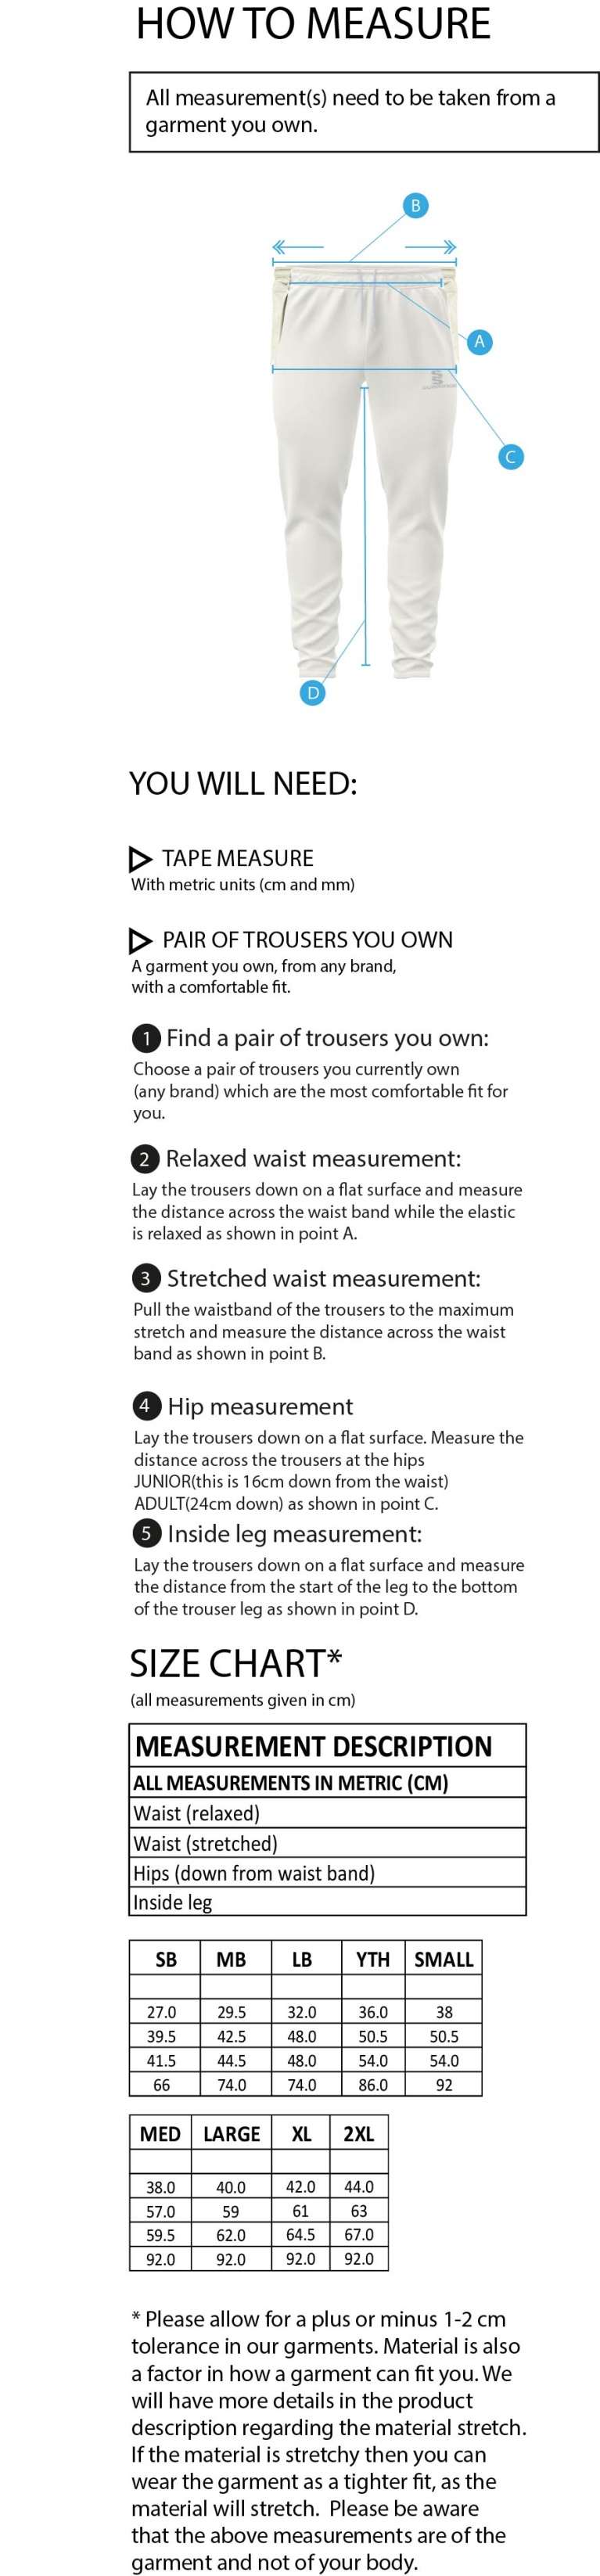 Clumber Park Cricket Club tek playing trousers - Size Guide